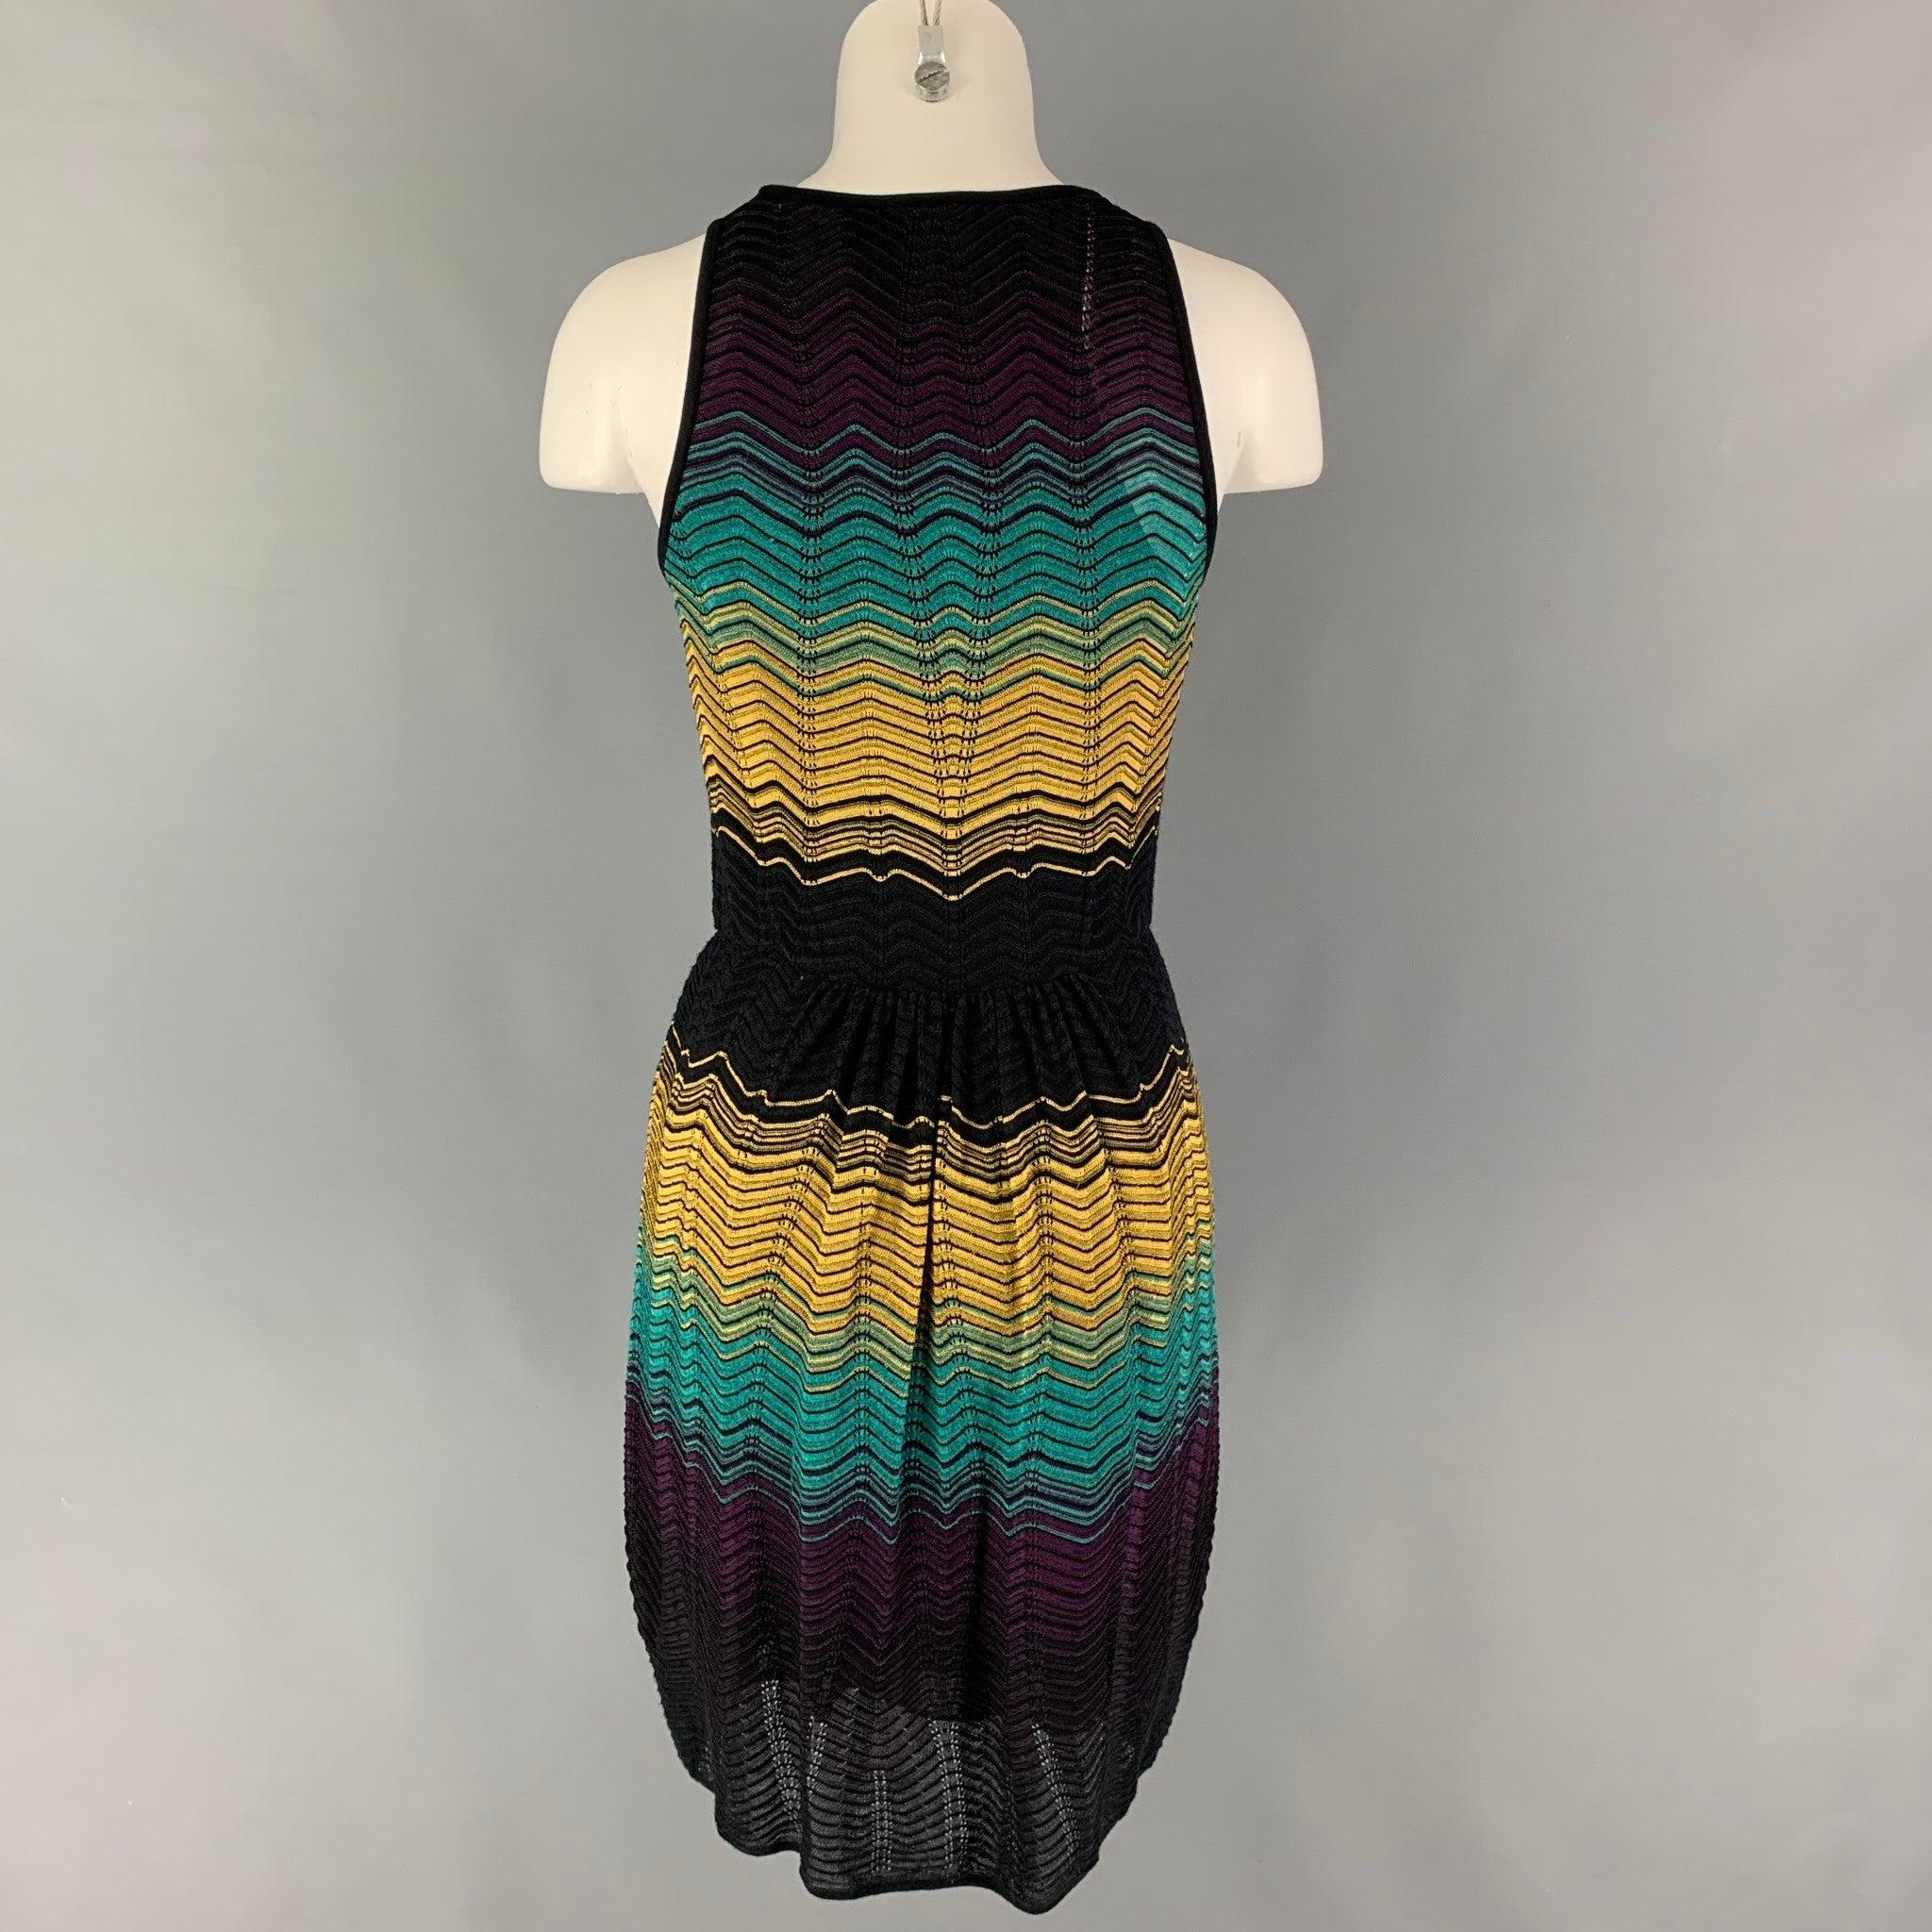 M MISSONI Size 6 Yellow Black Green Viscose Blend Zig Zag Sleeveless Dress In Excellent Condition For Sale In San Francisco, CA